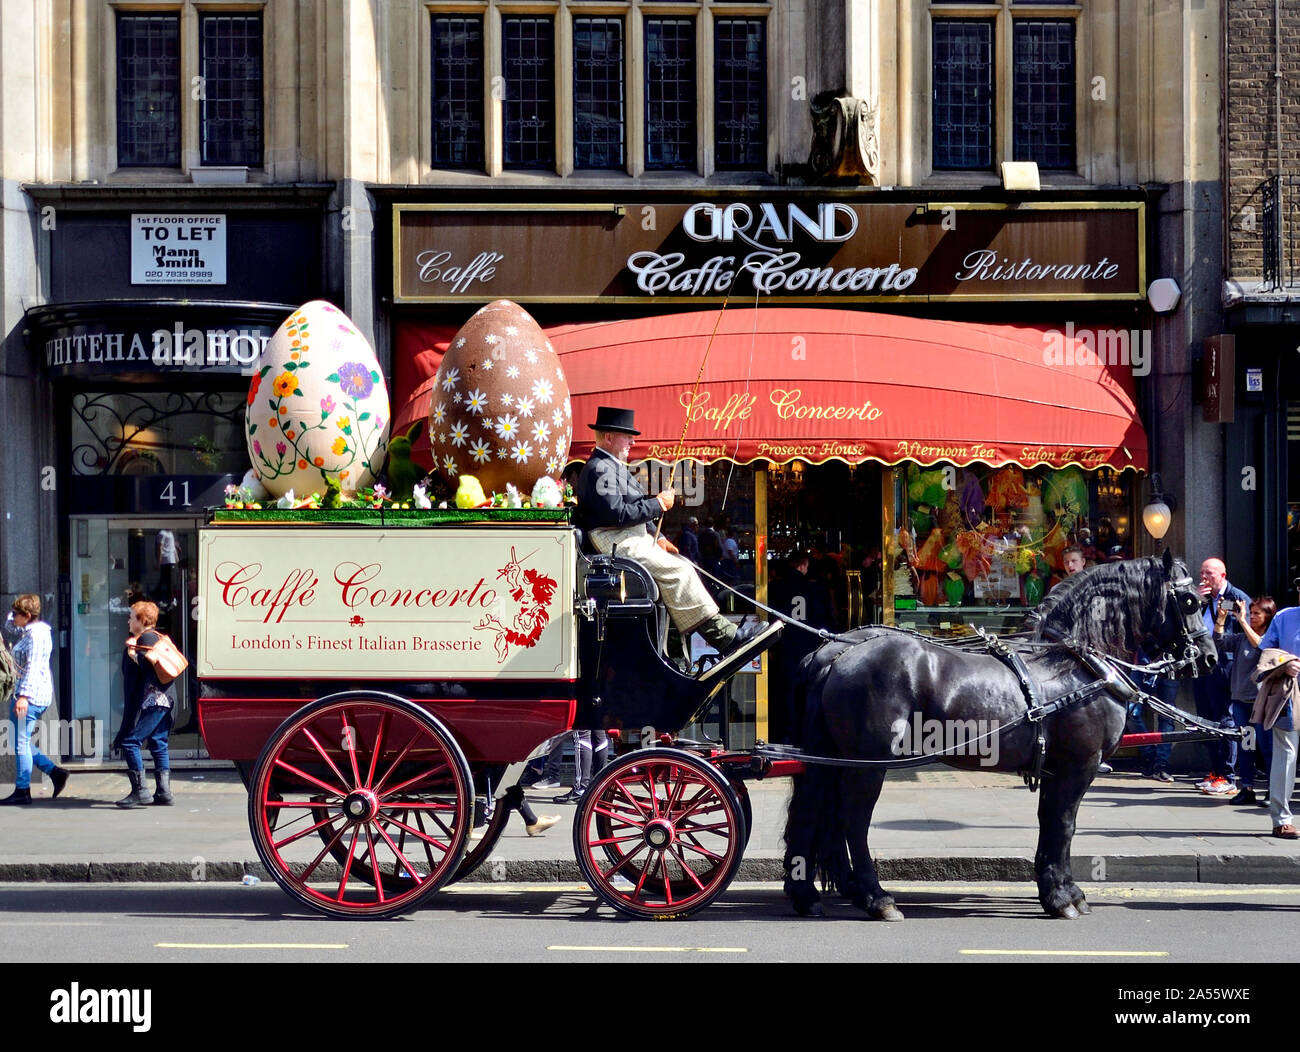 London, England, UK. Grand Cafe Concerto in Whitehall - horse and cart with Easter eggs Stock Photo